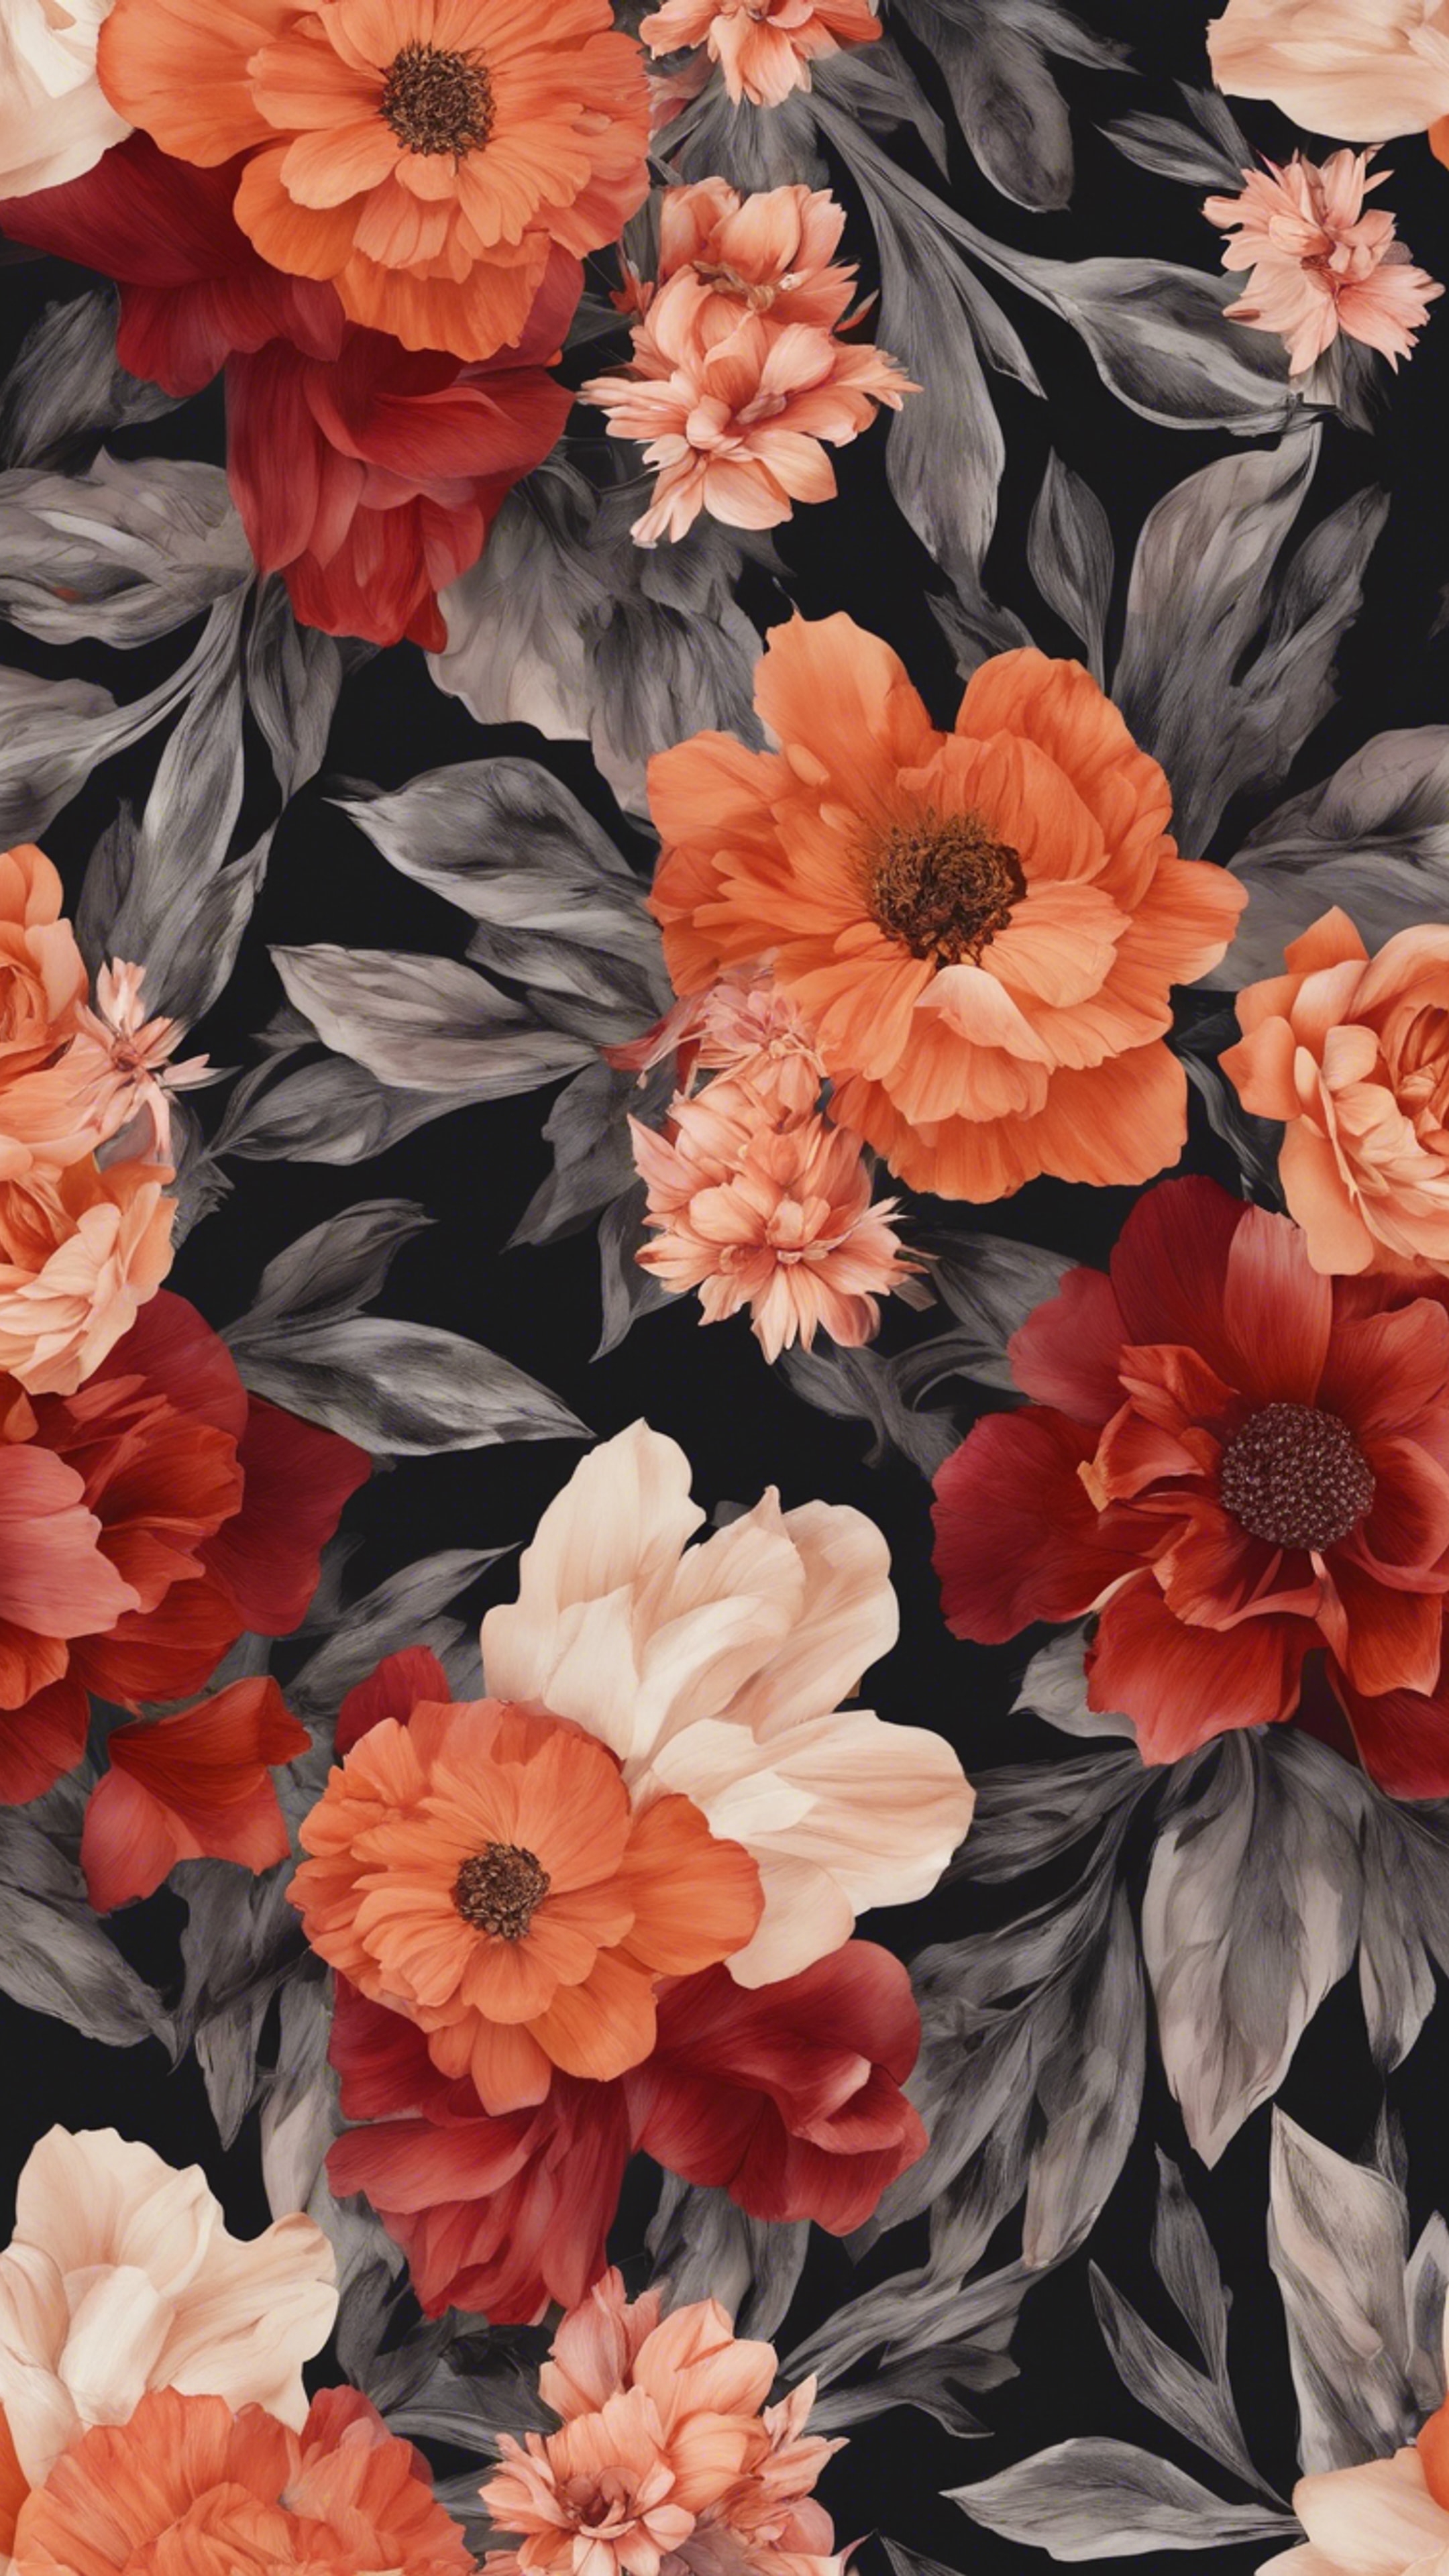 Seamless floral pattern with red and orange flowers that have a gradient effect. Behang[2b8b1301f068420e9b5a]